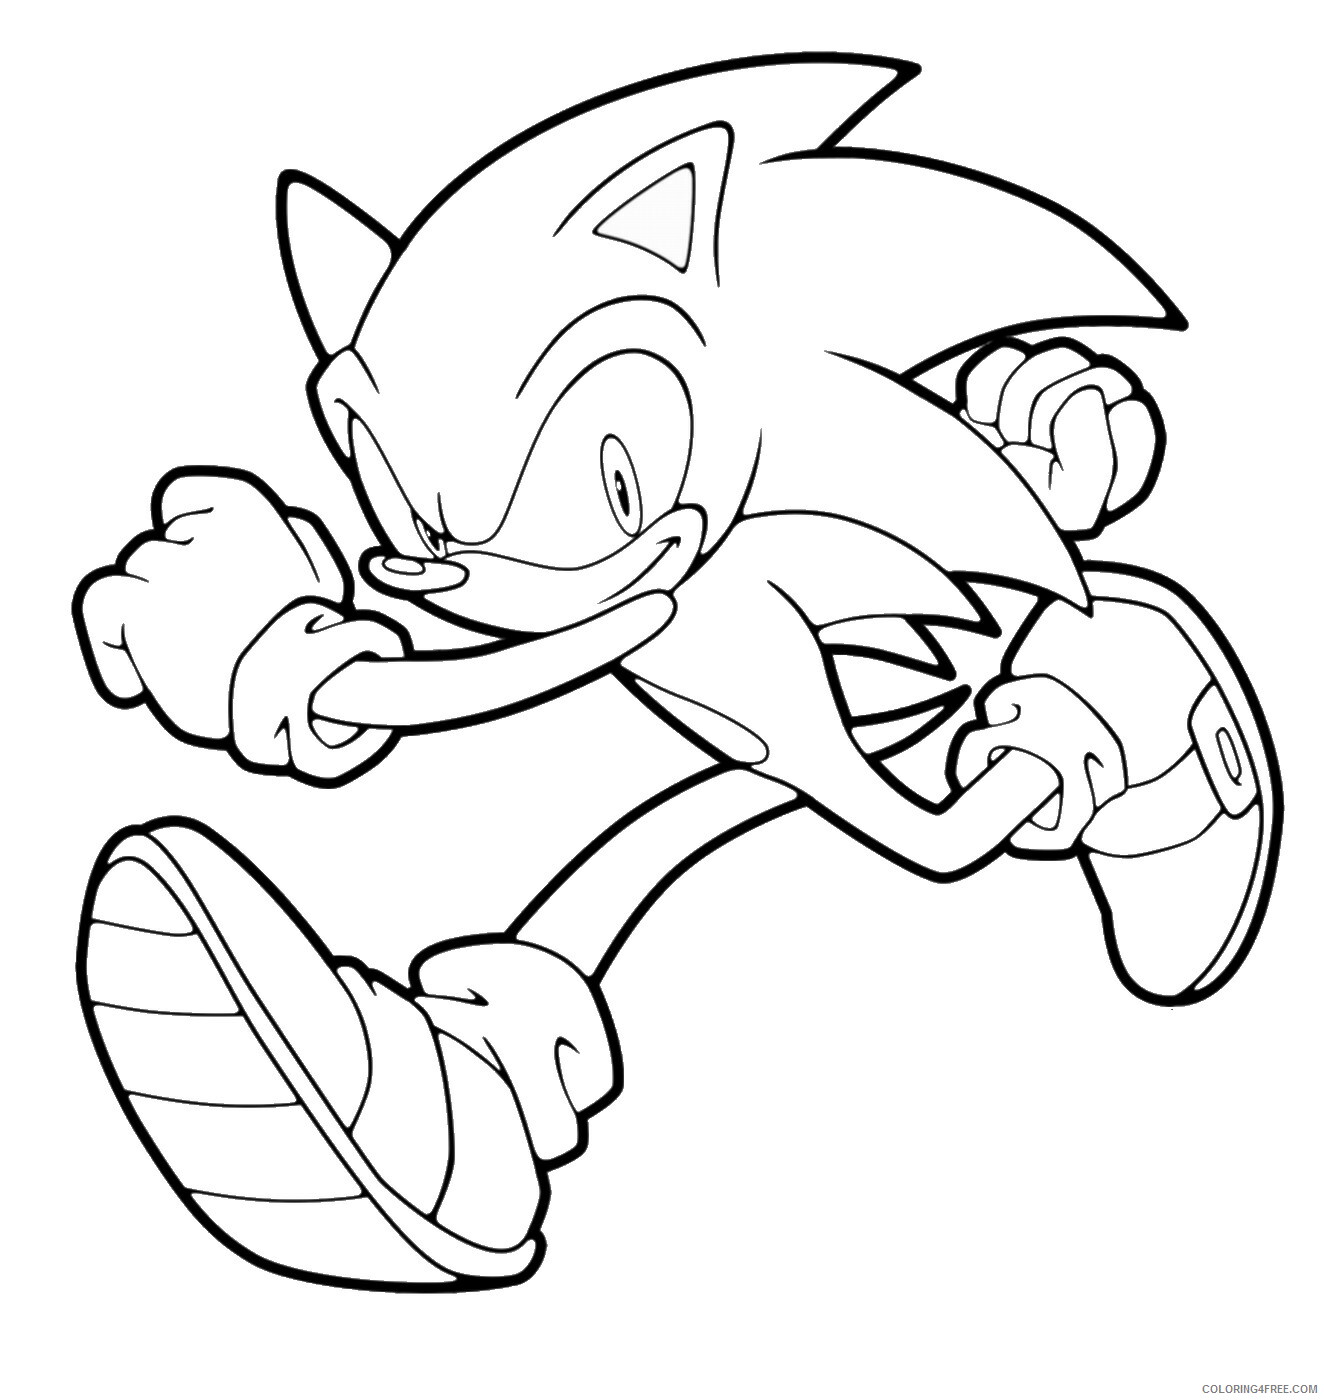 Sonic Coloring Pages Games sonic_cl19 Printable 2021 1082 Coloring4free